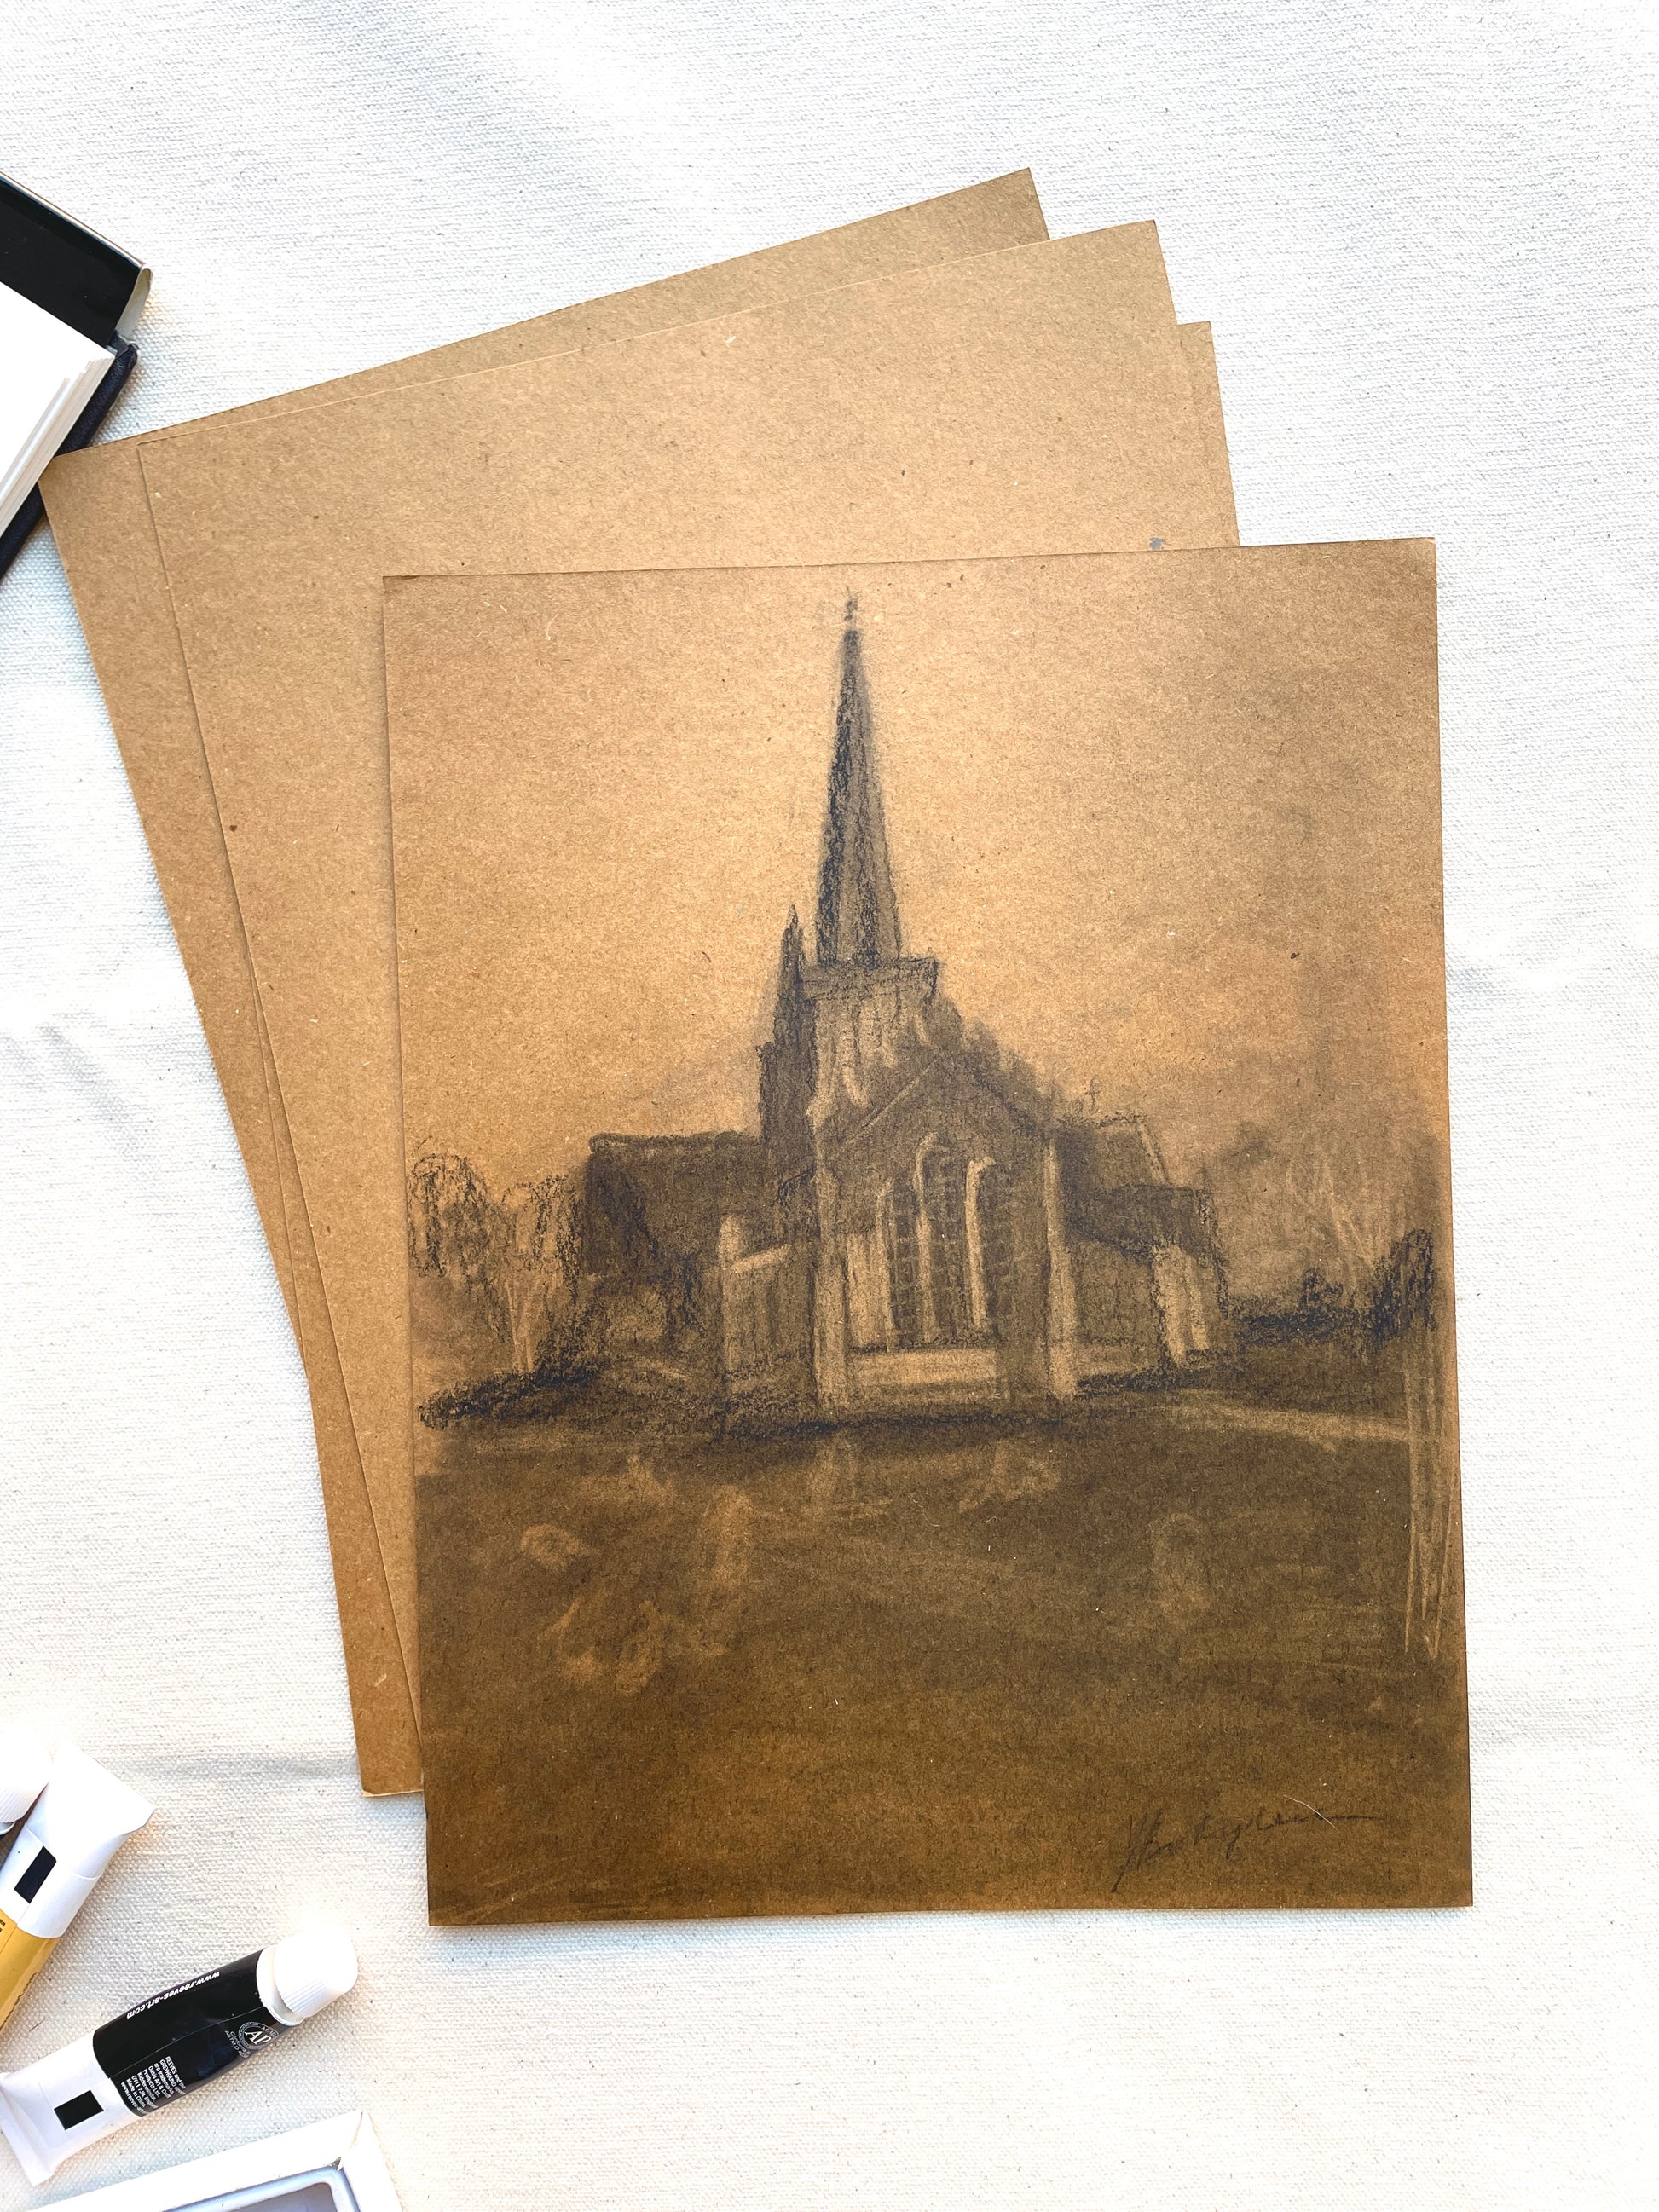 Expertly drawn church illustration on craft paper